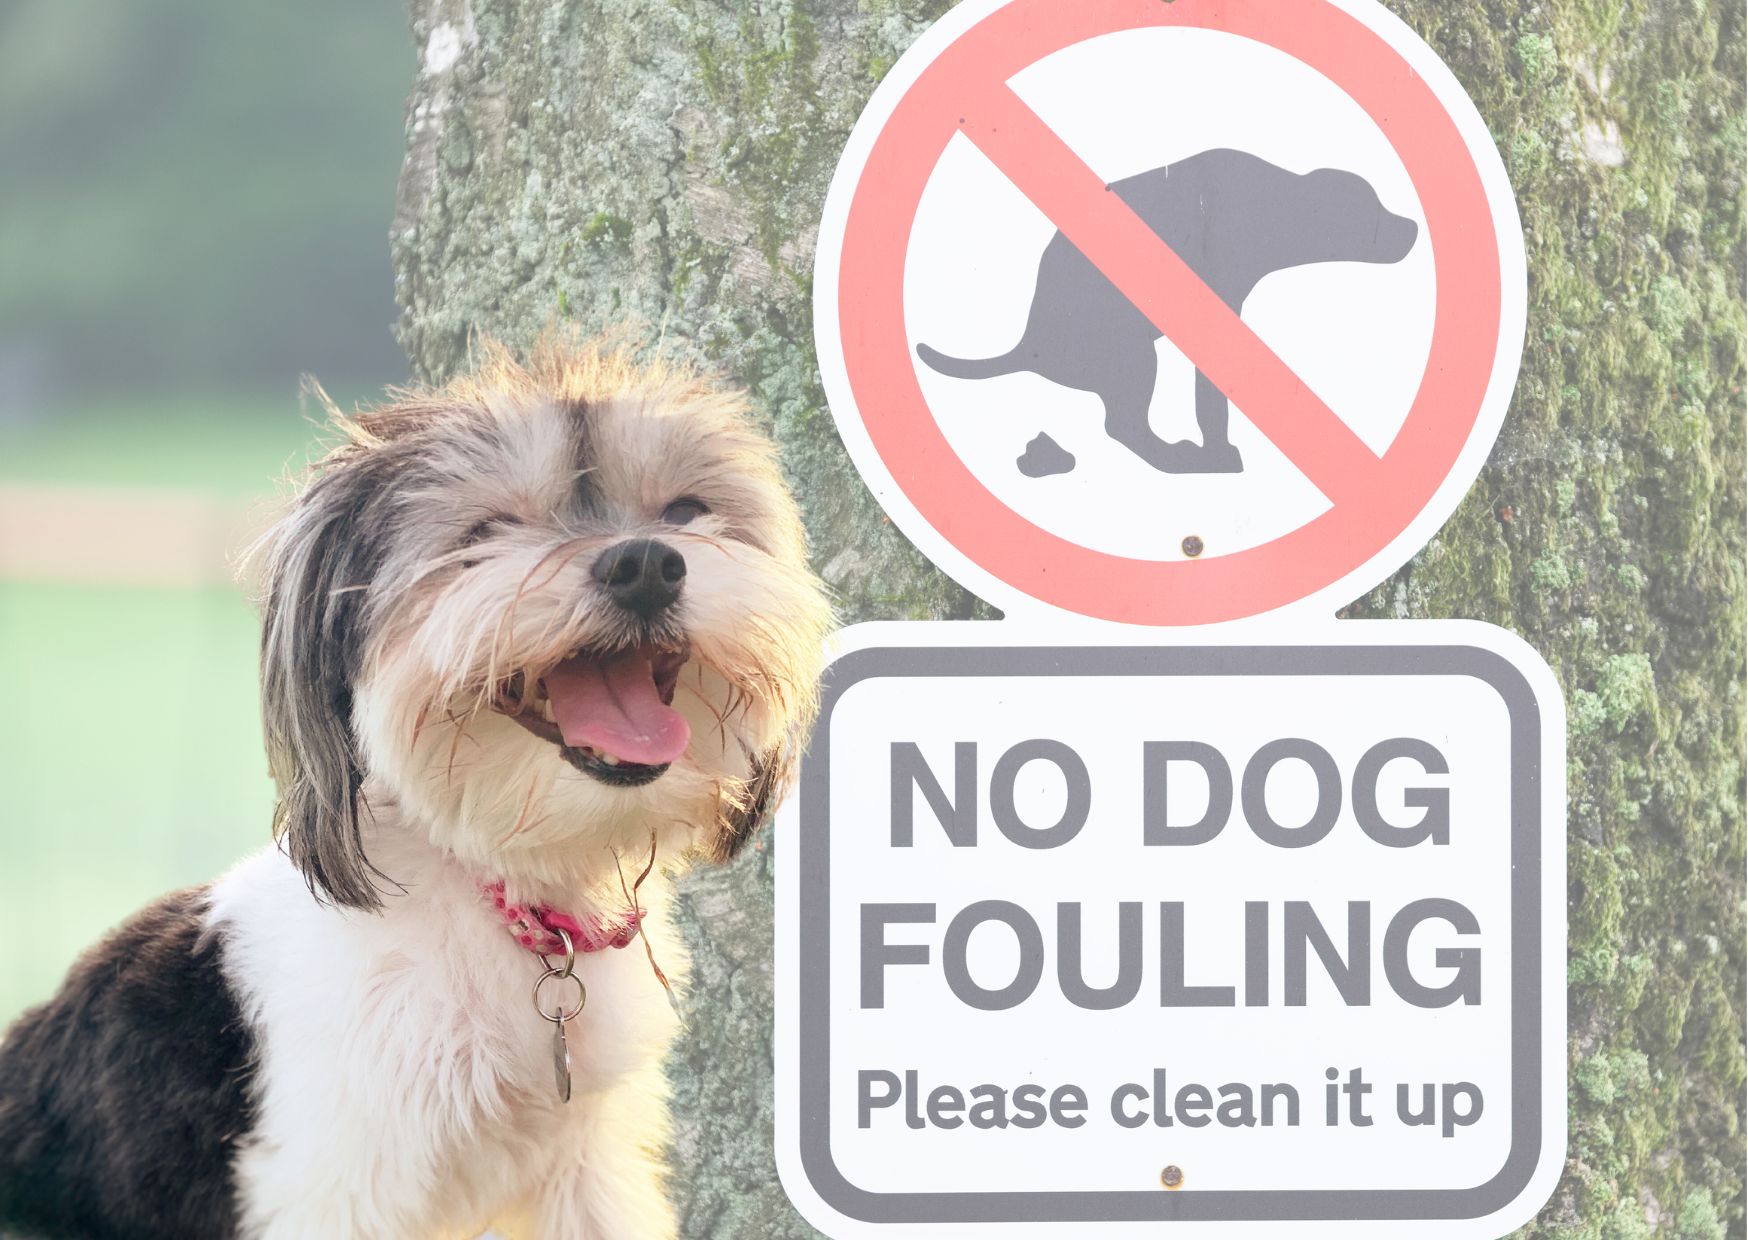 volunteers-sought-for-anti-dog-fouling-campaign-in-city-galway-bay-fm